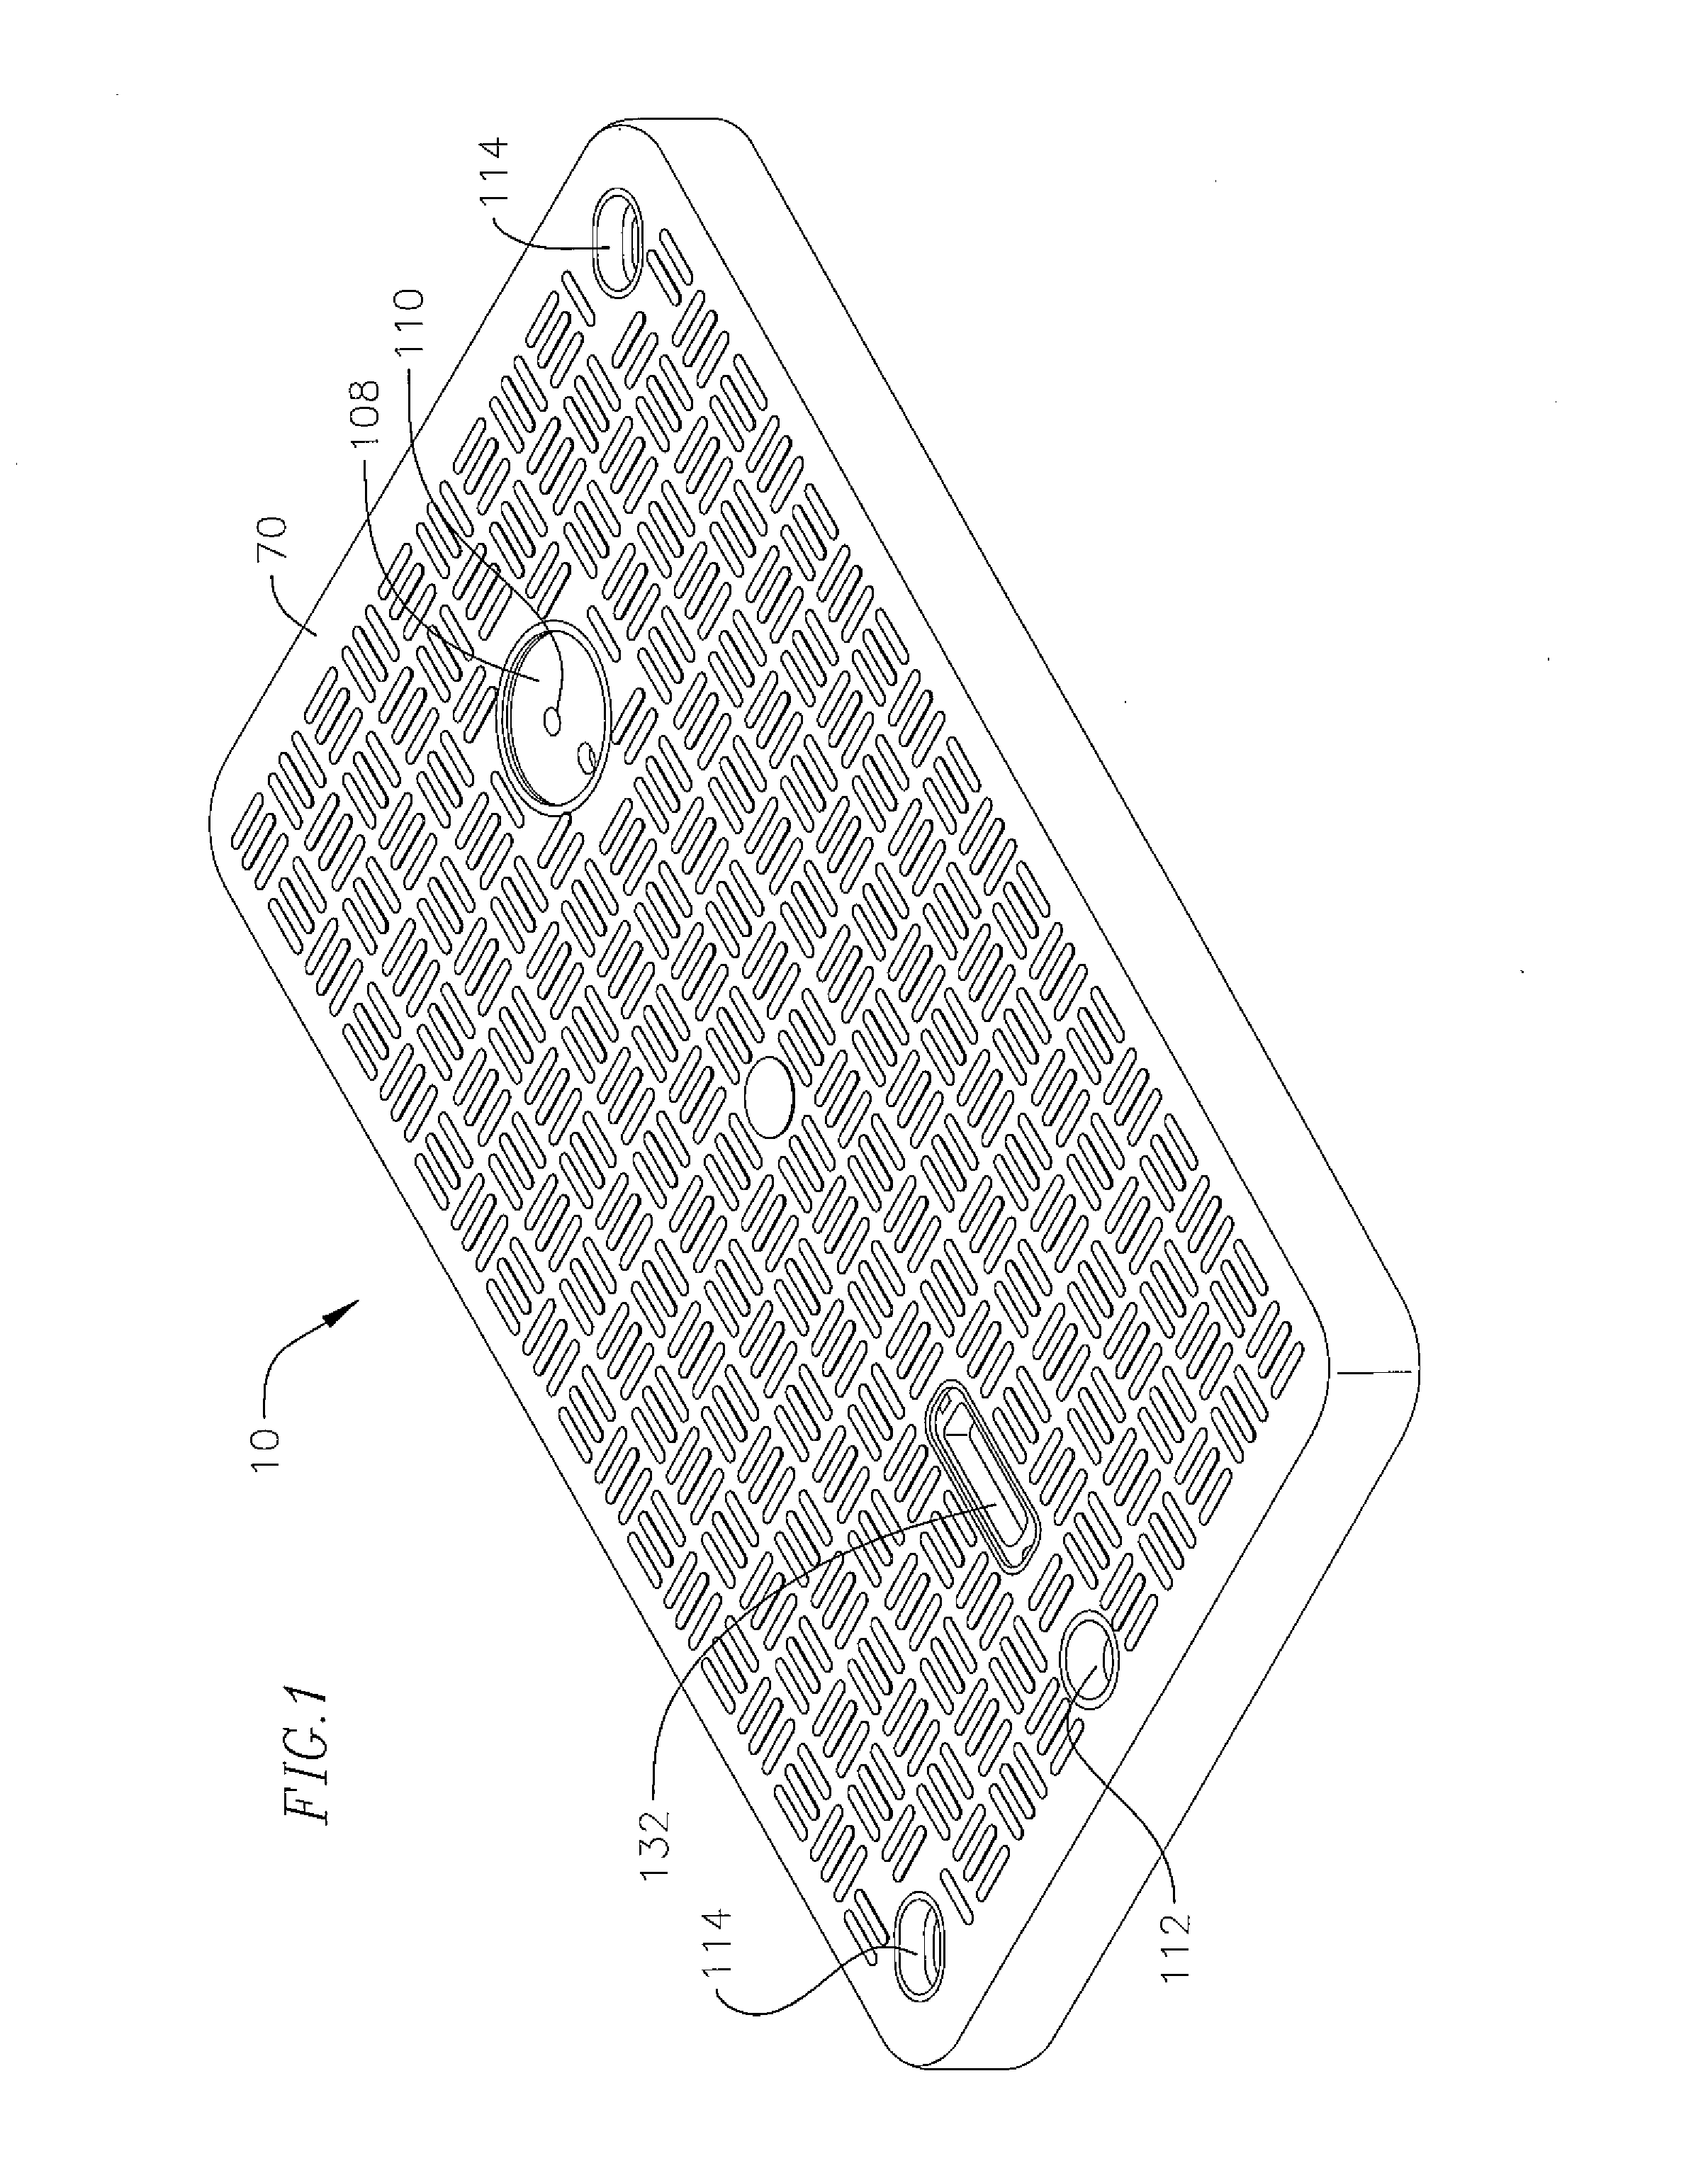 Method of manufacturing a thermoset polymer utility vault lid